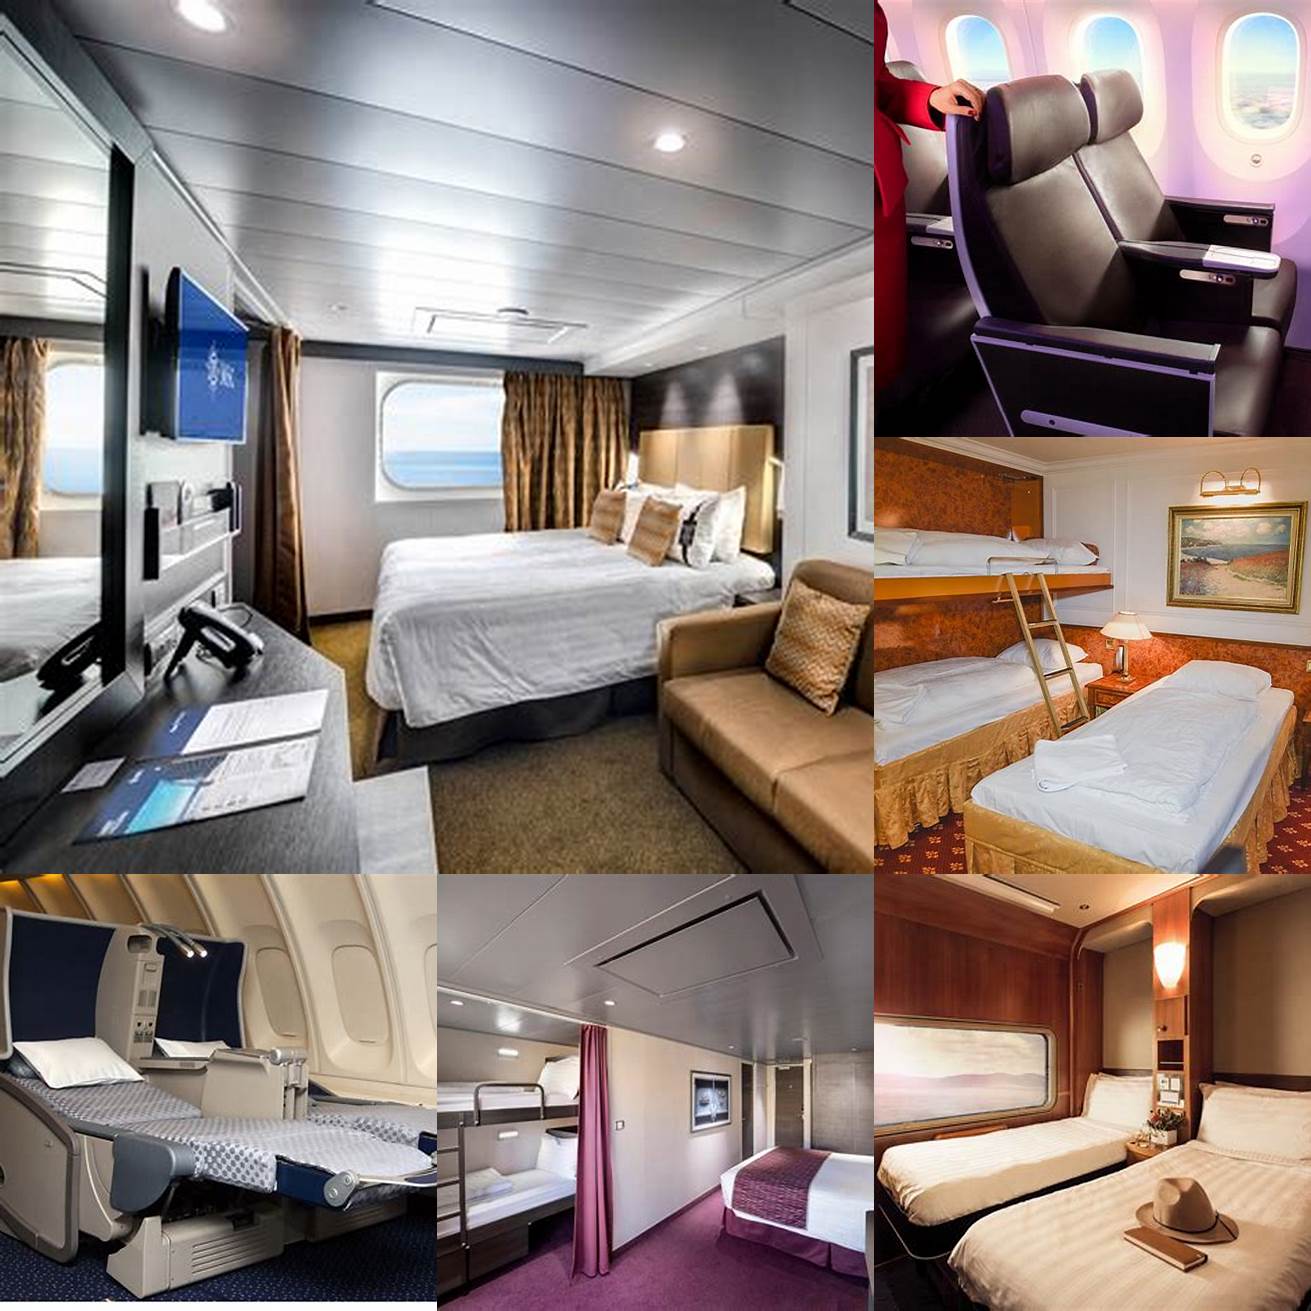 3 Space Flat beds are typically located in premium cabins which means more space to spread out and store your belongings